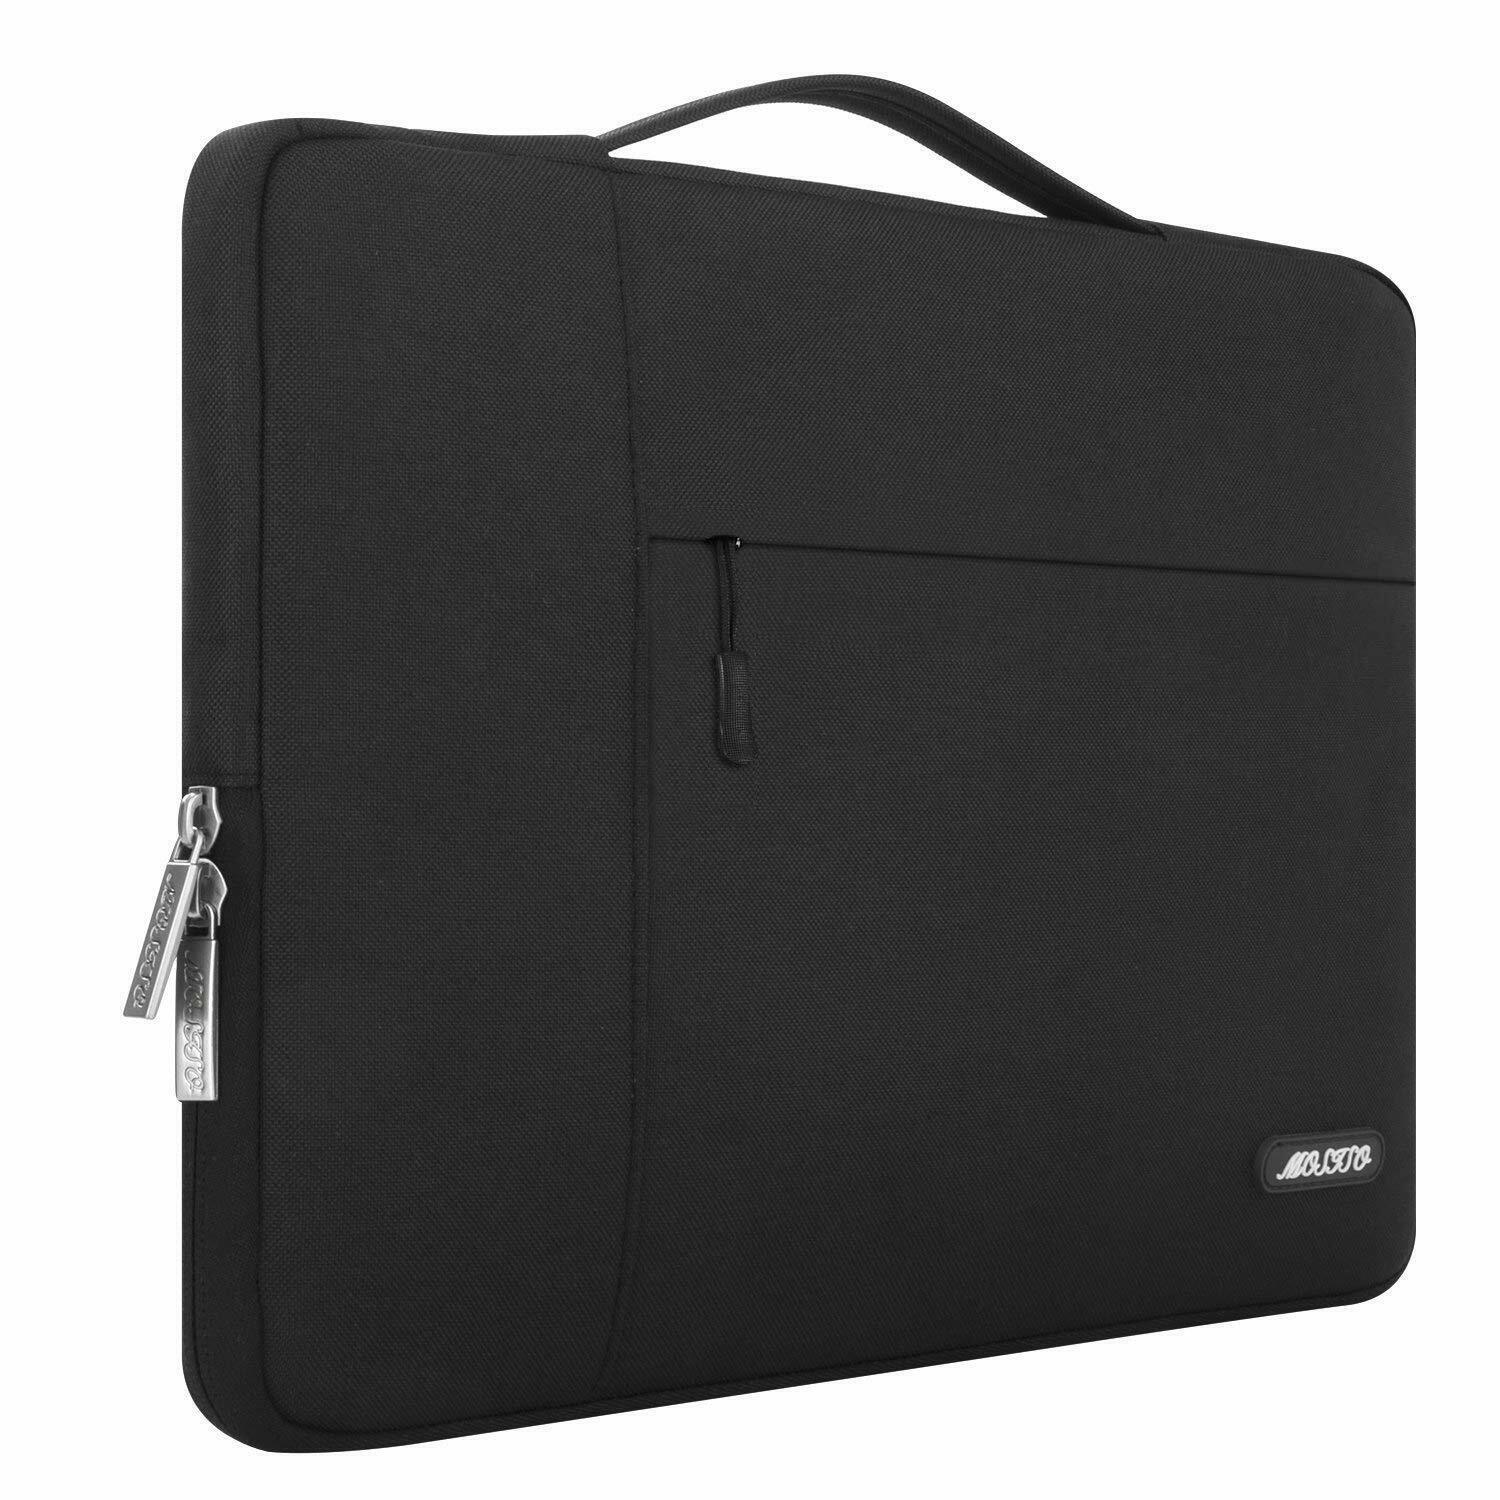 Laptop Sleeve Bag Briefcase Pouch Cover for Macbook Air Pro 11 12 13.3 14 15 16